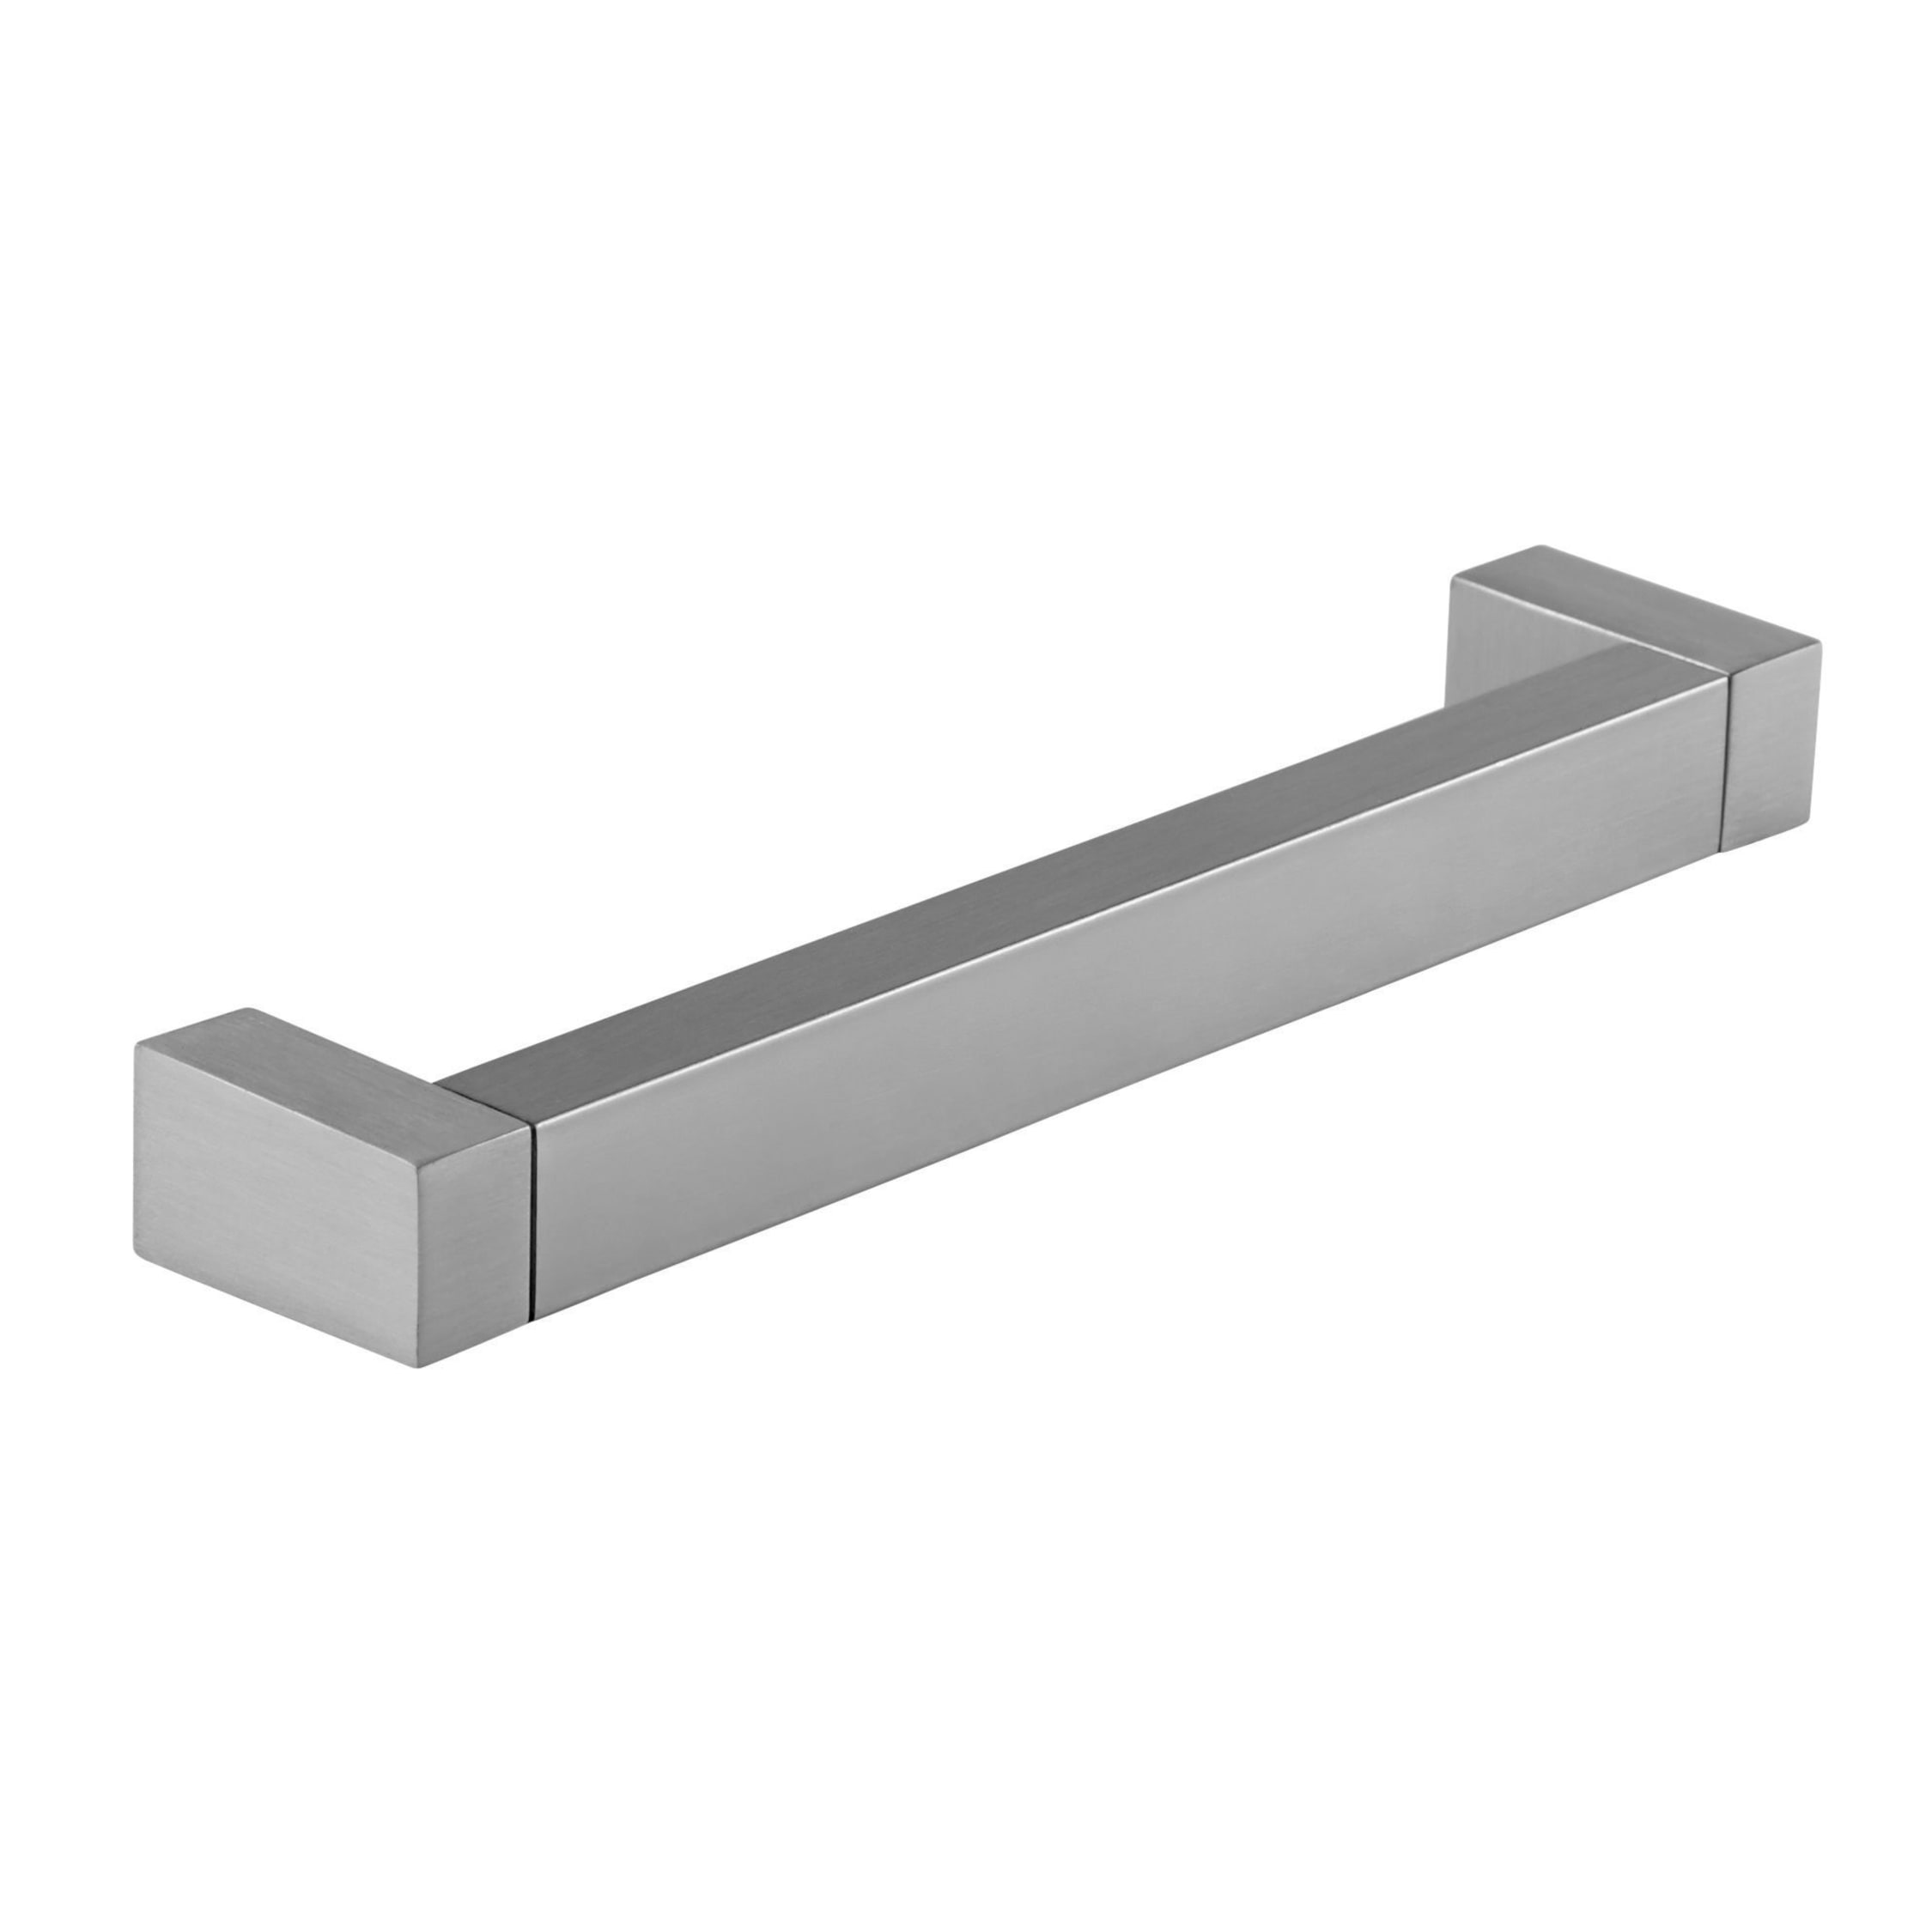 Brand New! 1 X Wickes Kitchen Square D Handle Stainless Steel 288mm H09 